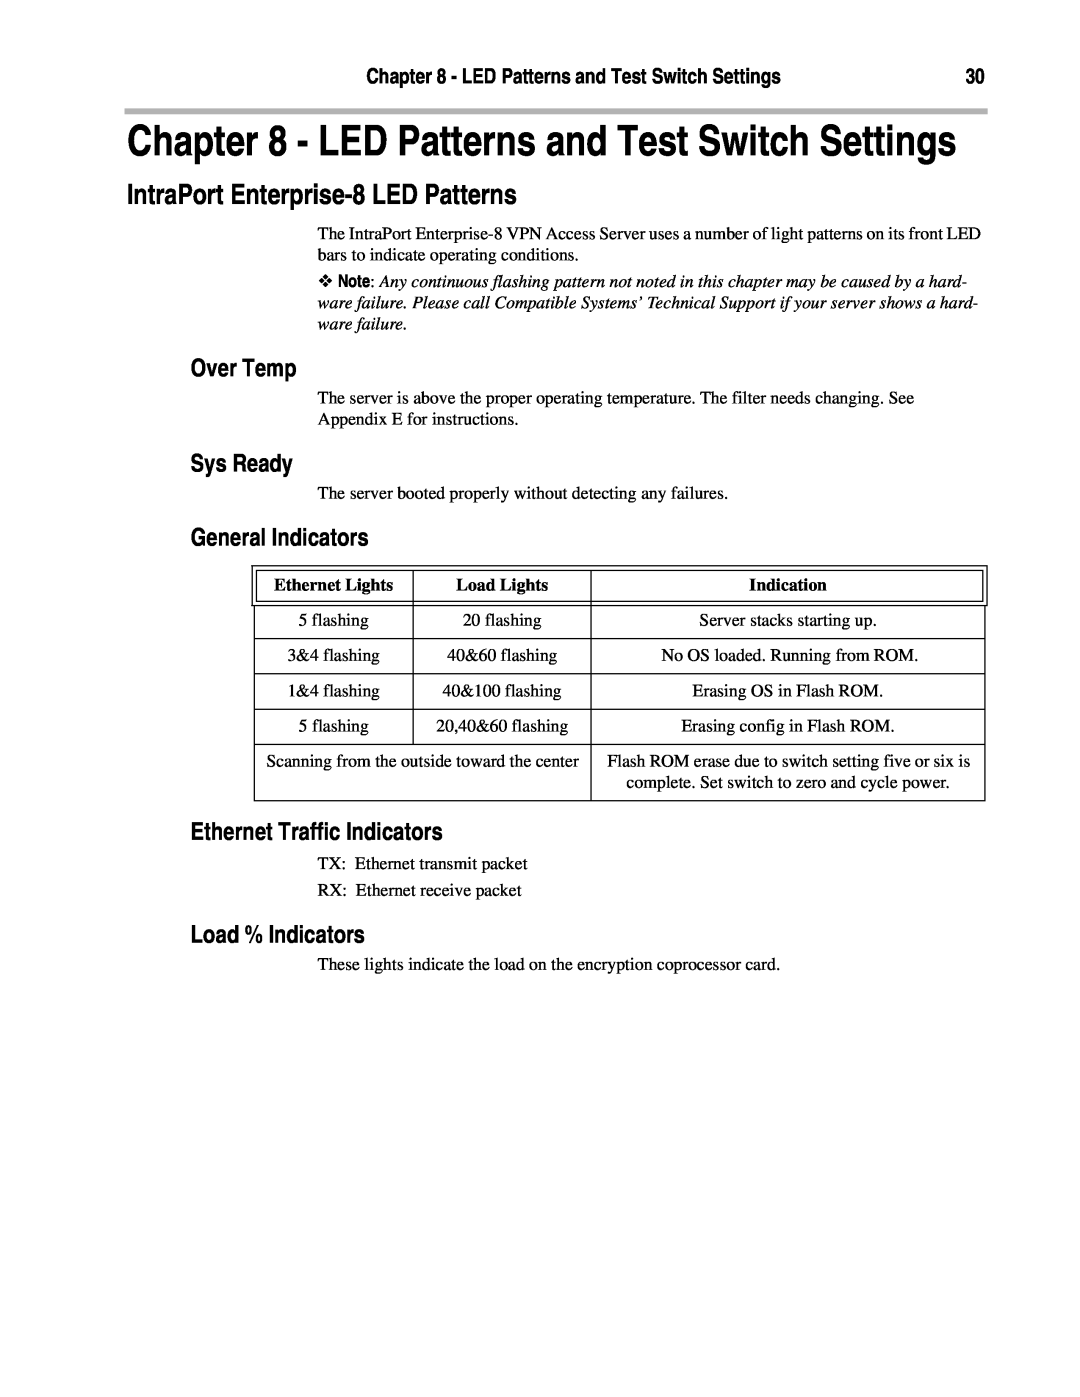 Compatible Systems A00-1869 manual LED Patterns and Test Switch Settings, IntraPort Enterprise-8 LED Patterns, Over Temp 